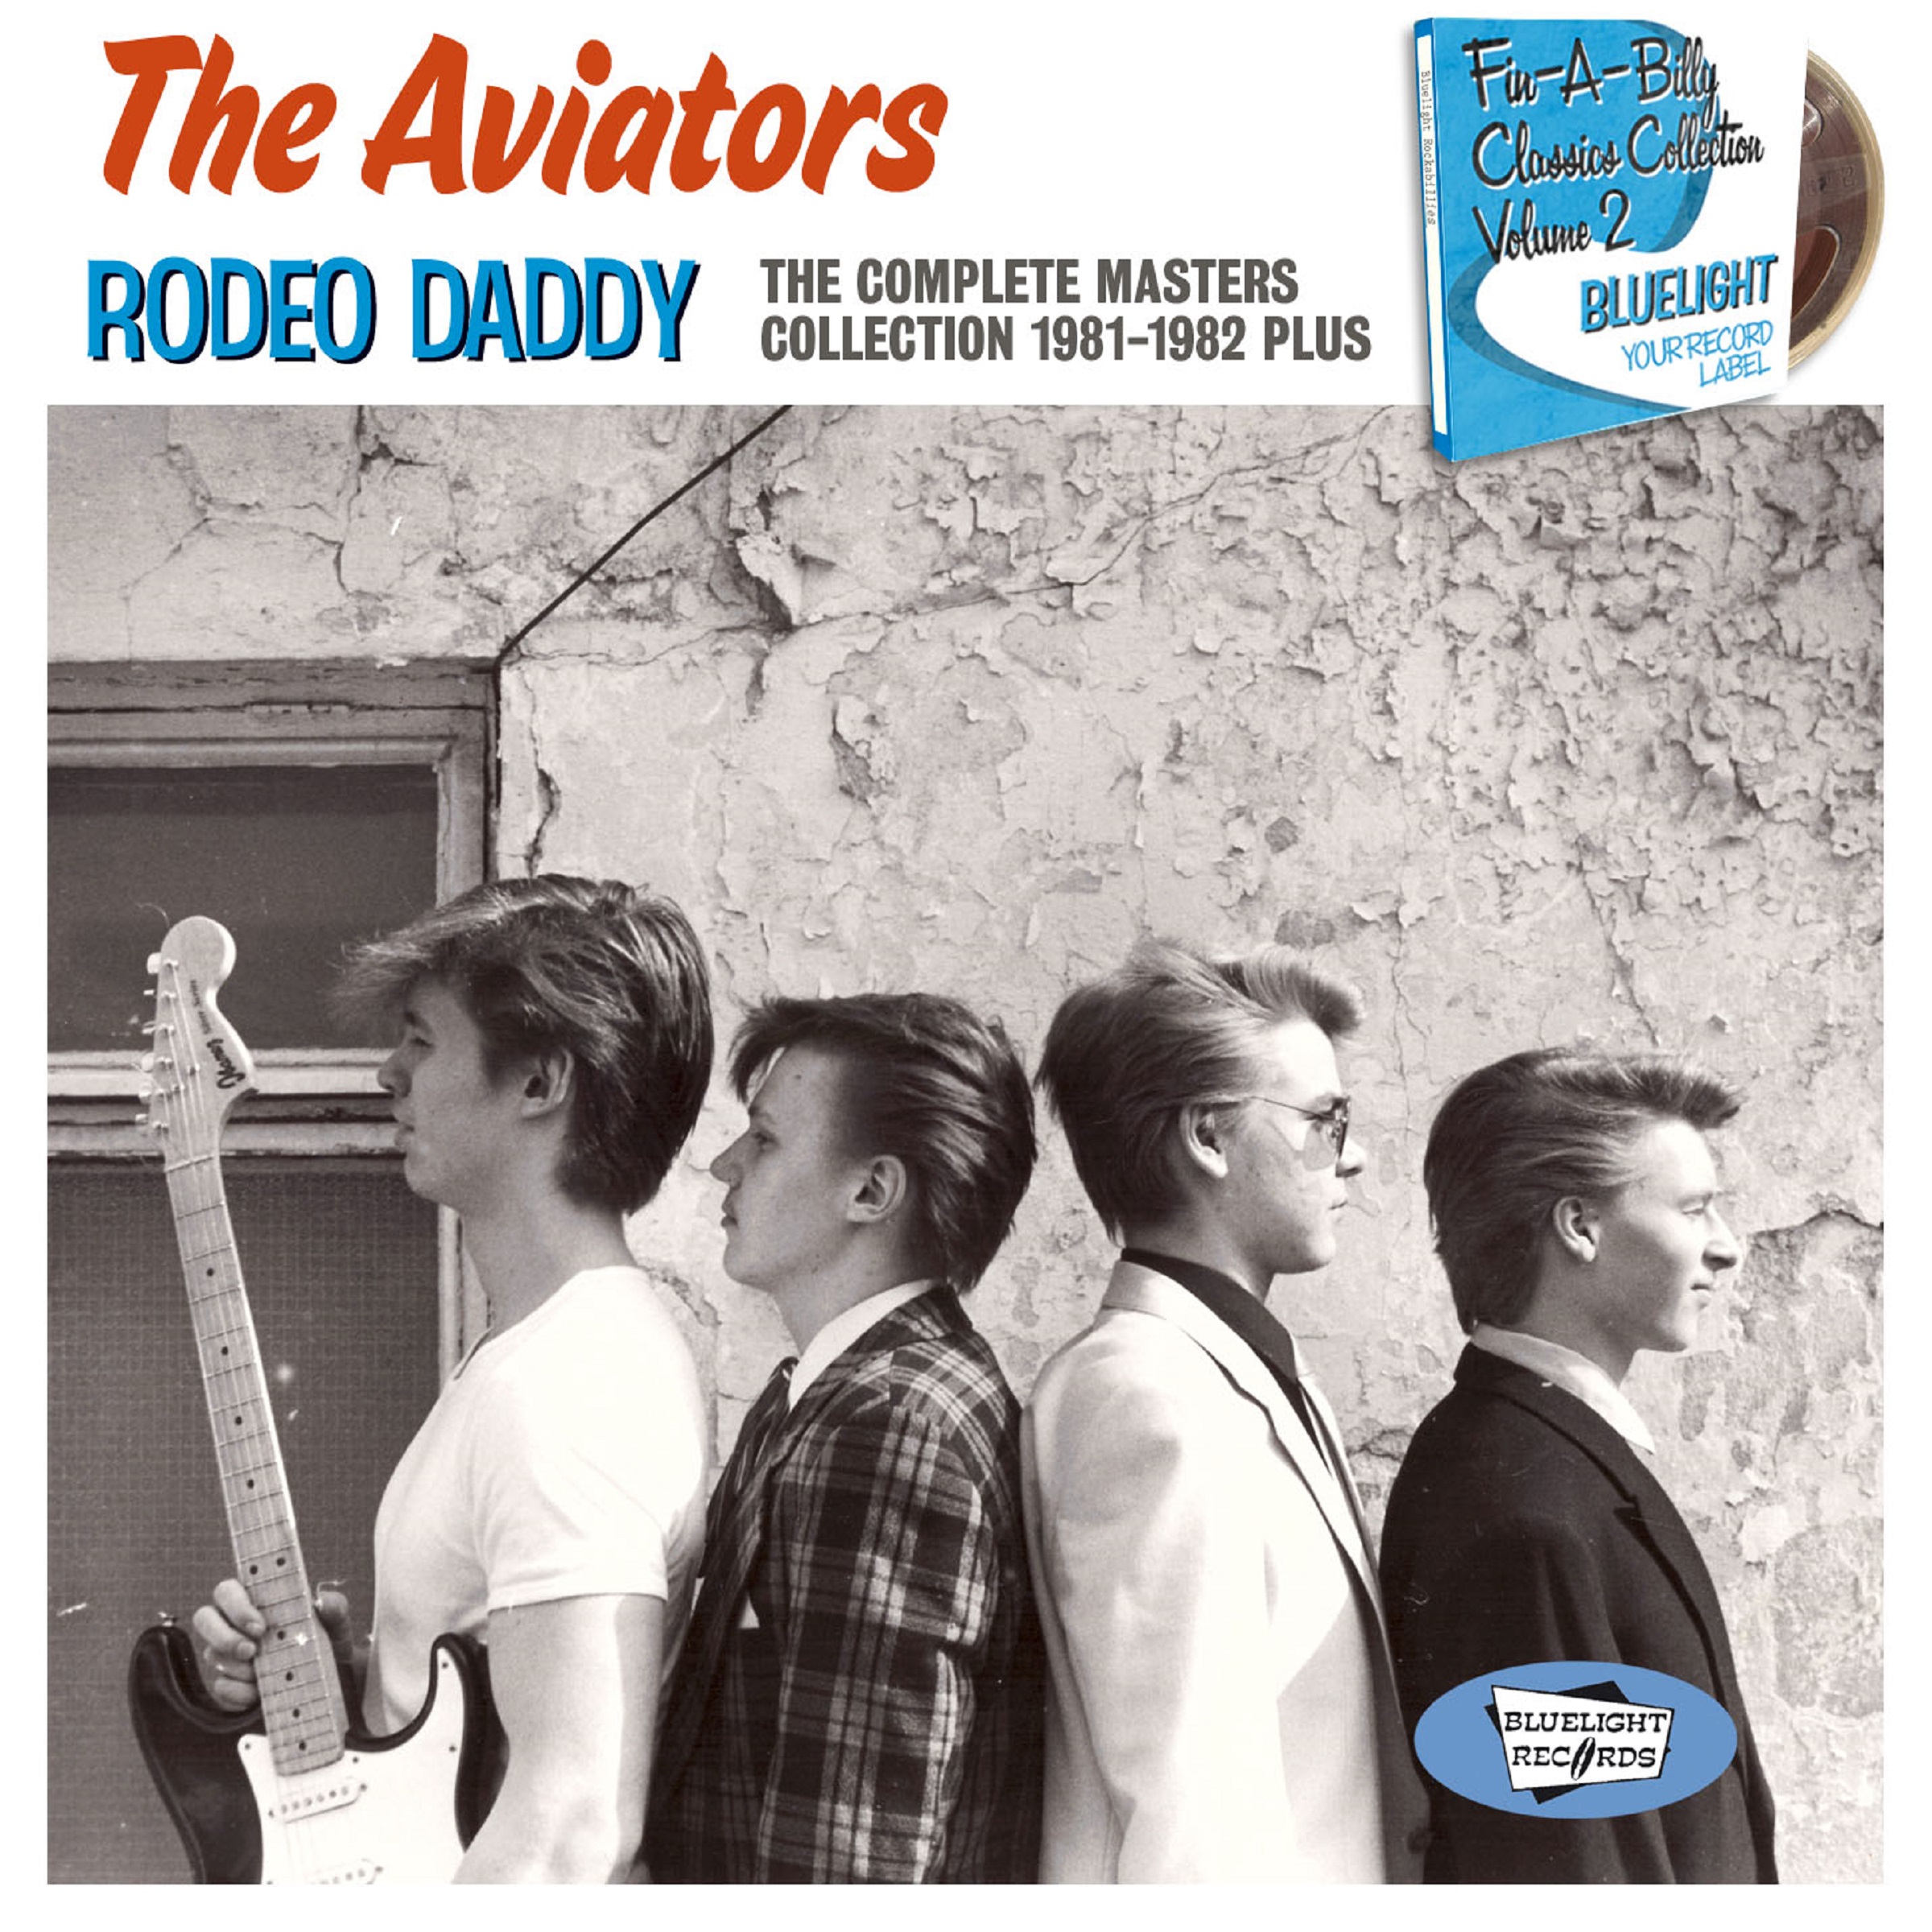 The Aviators - Rodeo Daddy - The Complete Masters - CD